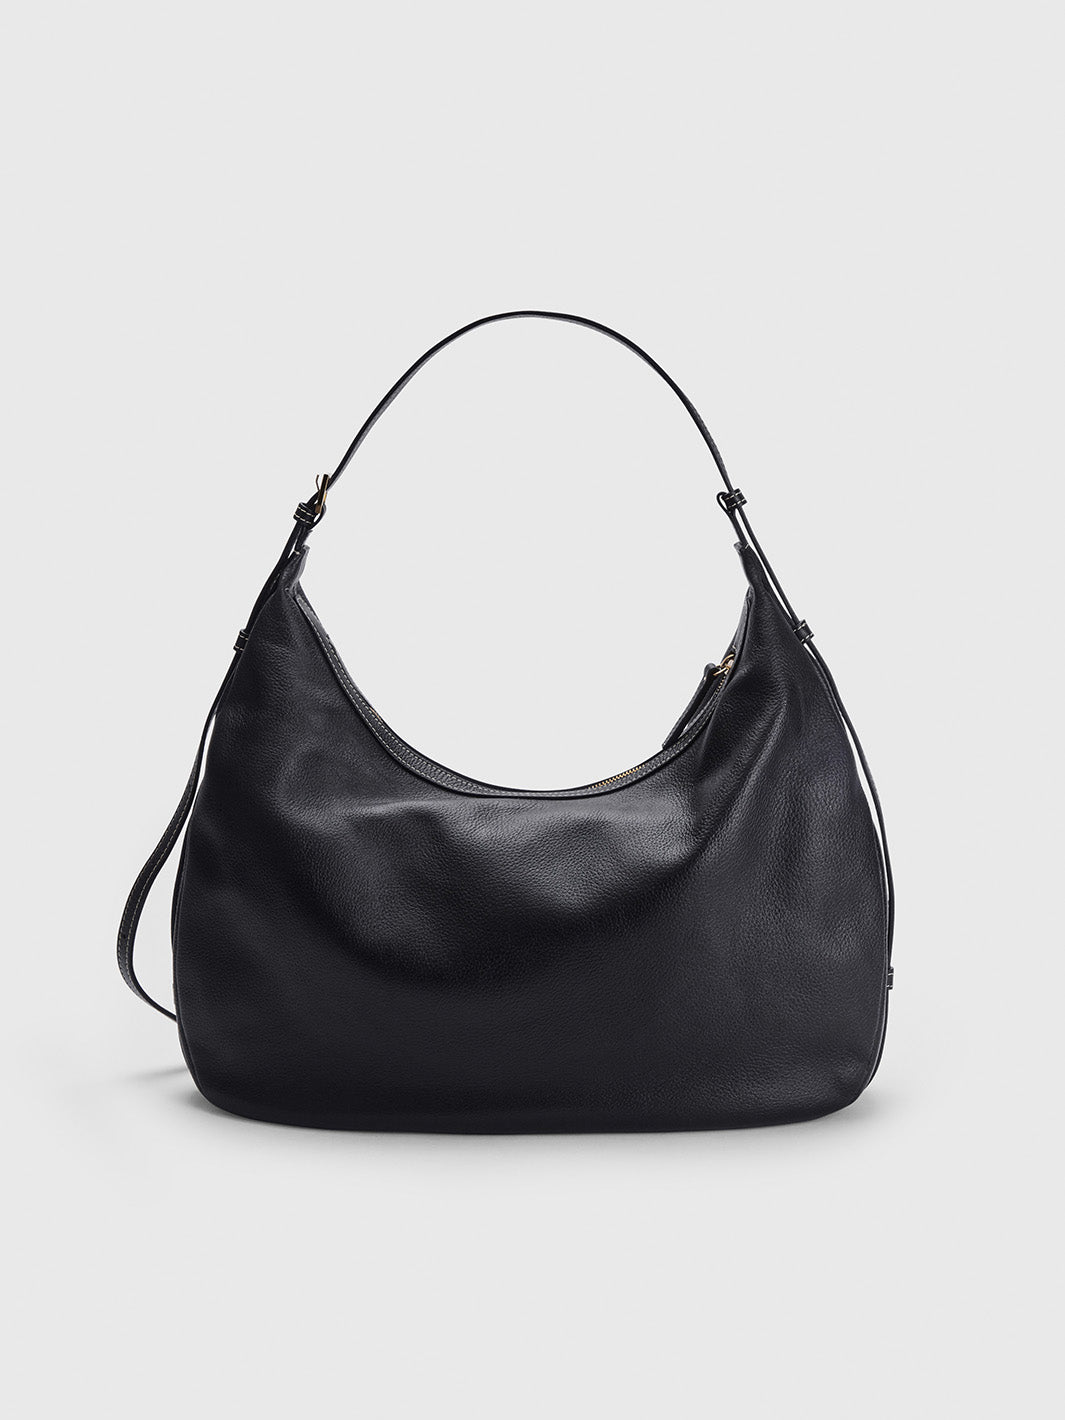 Potenza Black/Contrast Stitch Grained leather Large hobo bag – ATP Atelier